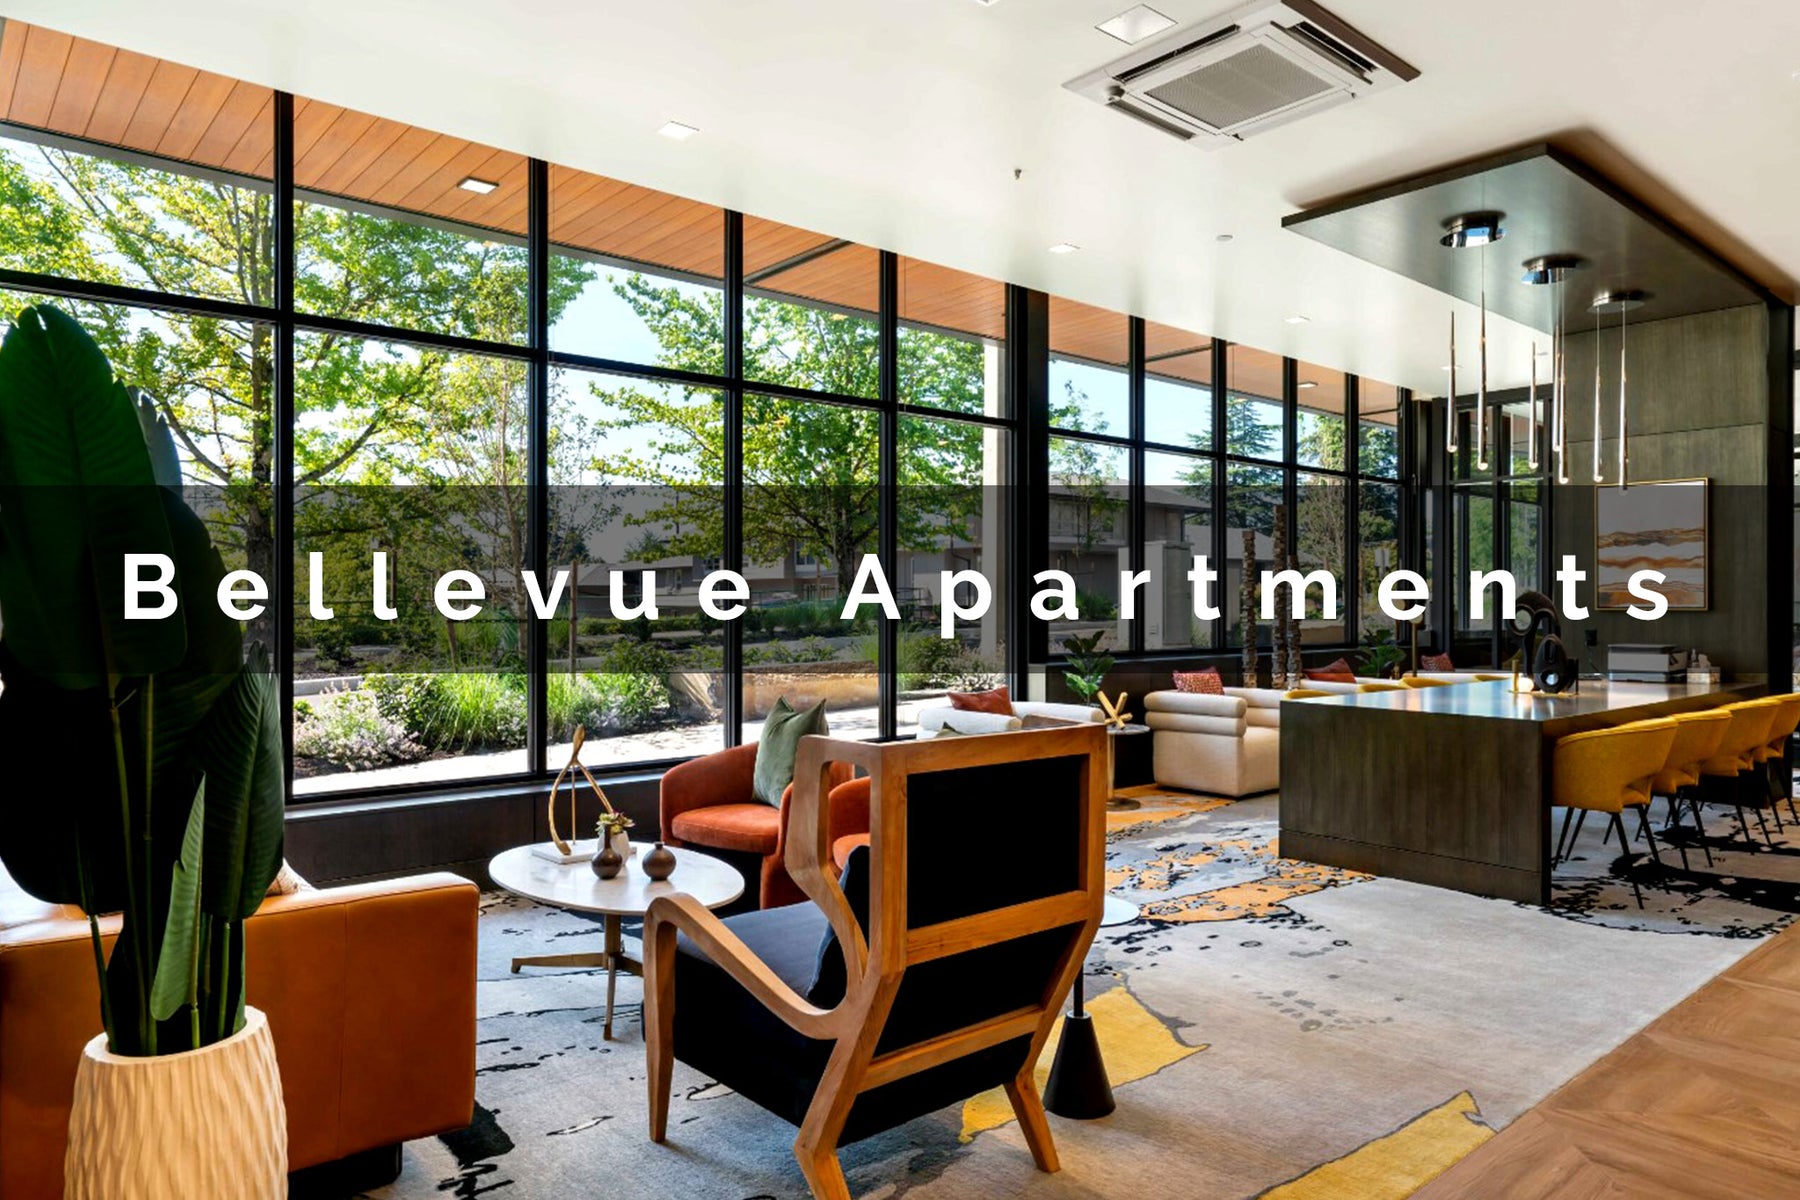 Project Showcase: Bellevue 10 Apartments & Christopher Fareed's "Sahil B" Rug